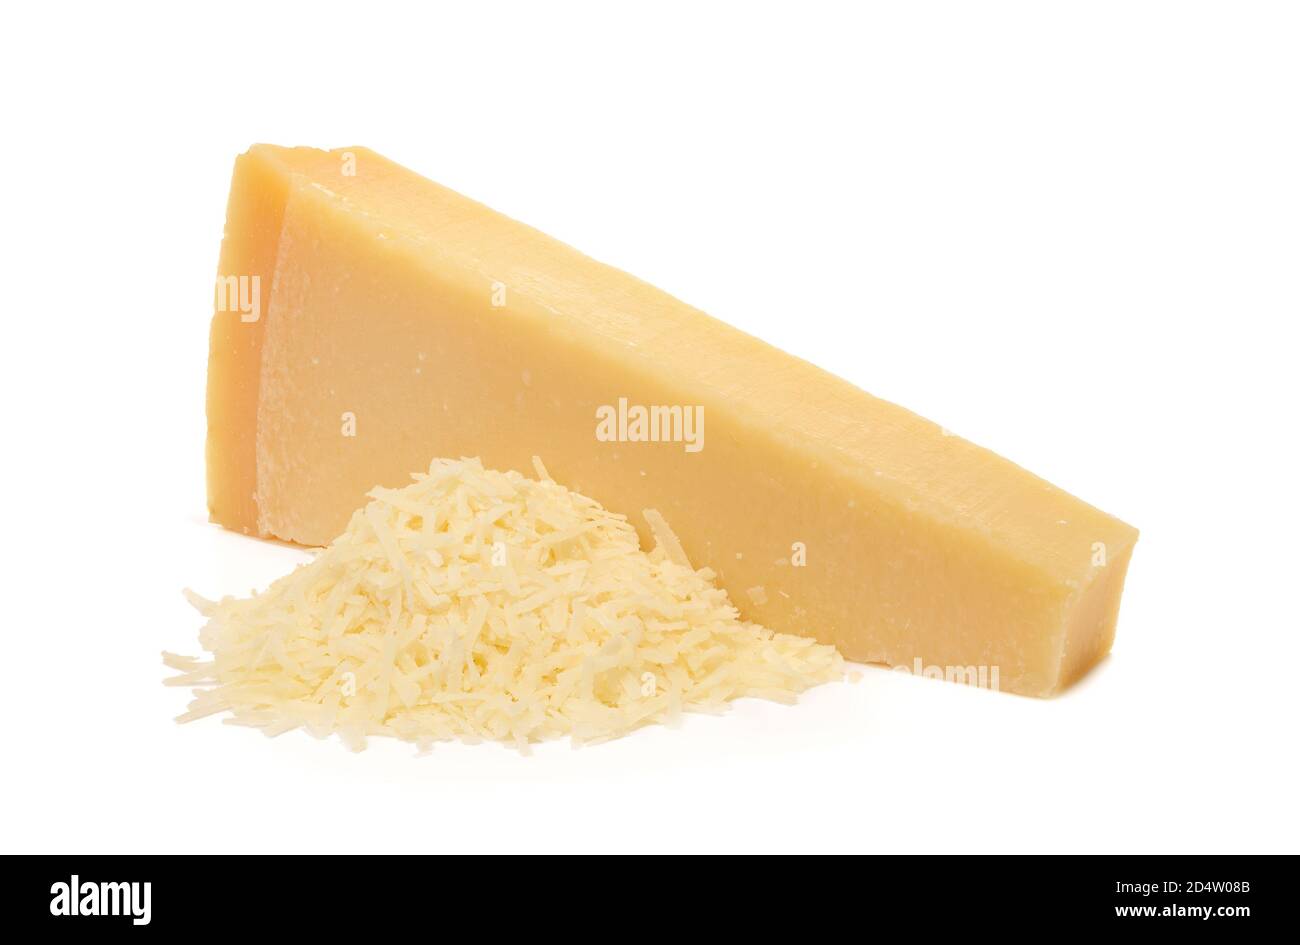 https://c8.alamy.com/comp/2D4W08B/whole-and-grated-italian-hard-cheese-grana-padano-or-parmesan-isolated-on-white-background-delicious-ingredient-for-pizza-sandwiches-salads-2D4W08B.jpg